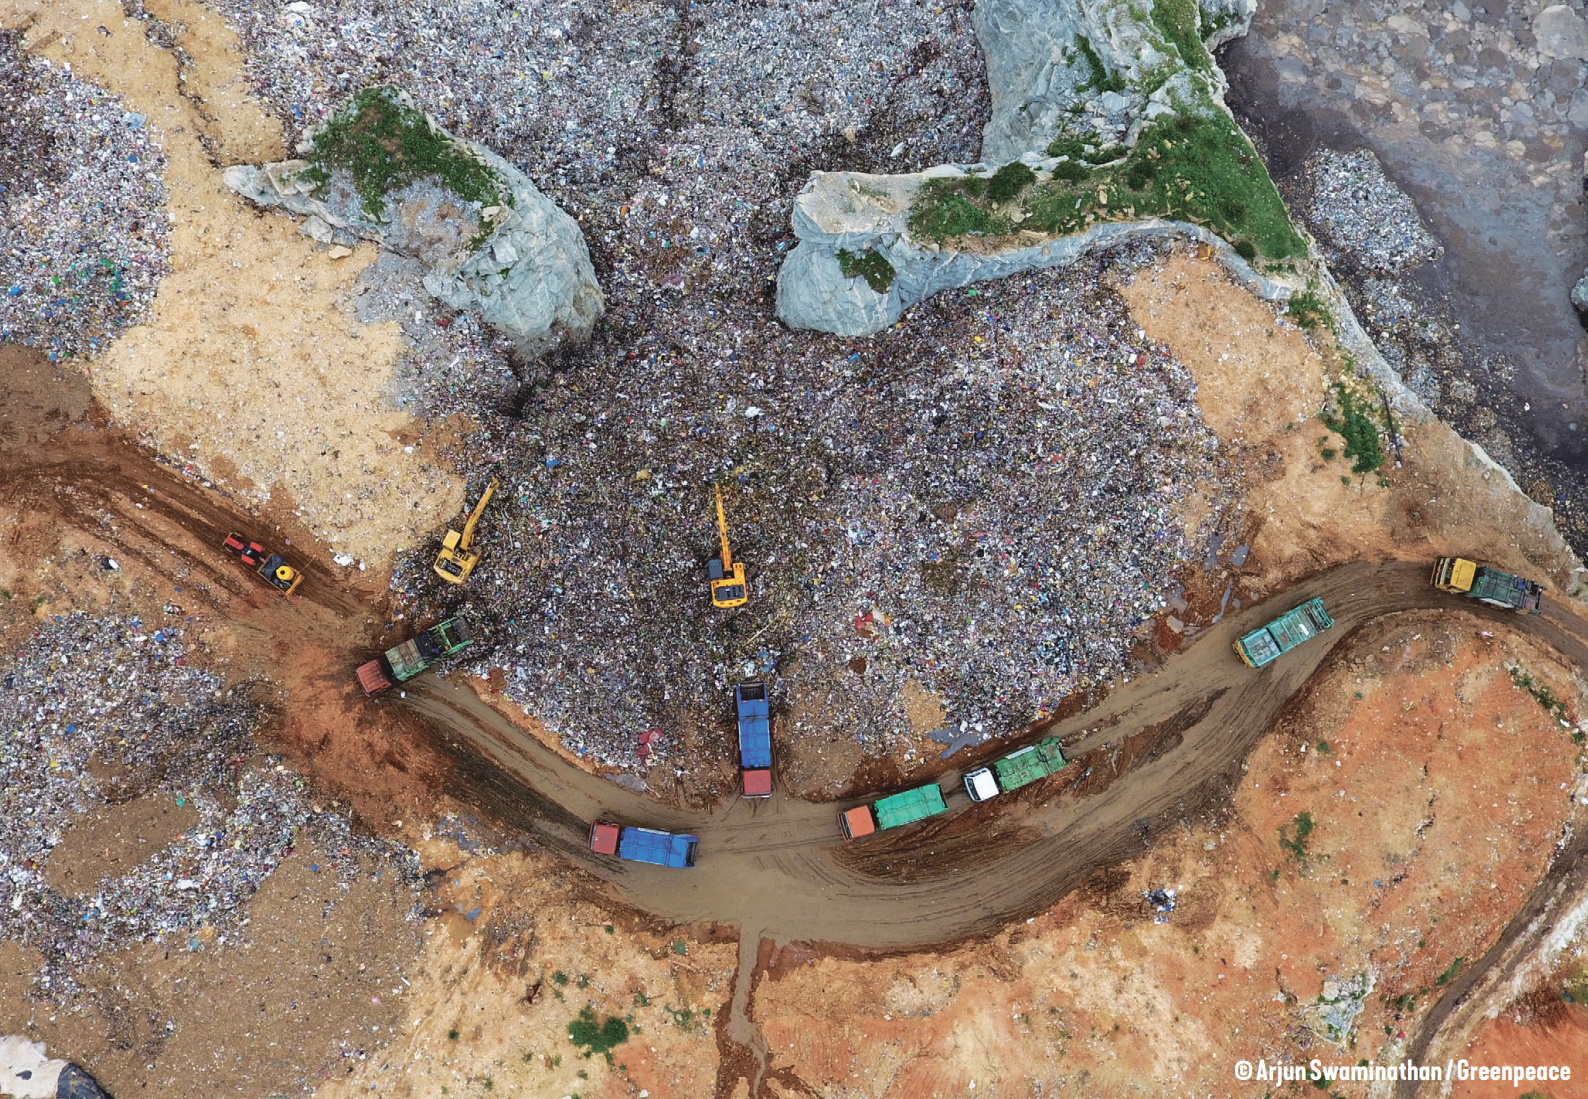 Aerial view of a landfill full of non-recycled plastic. Photo: Arjun Swaminathan / Greenpeace